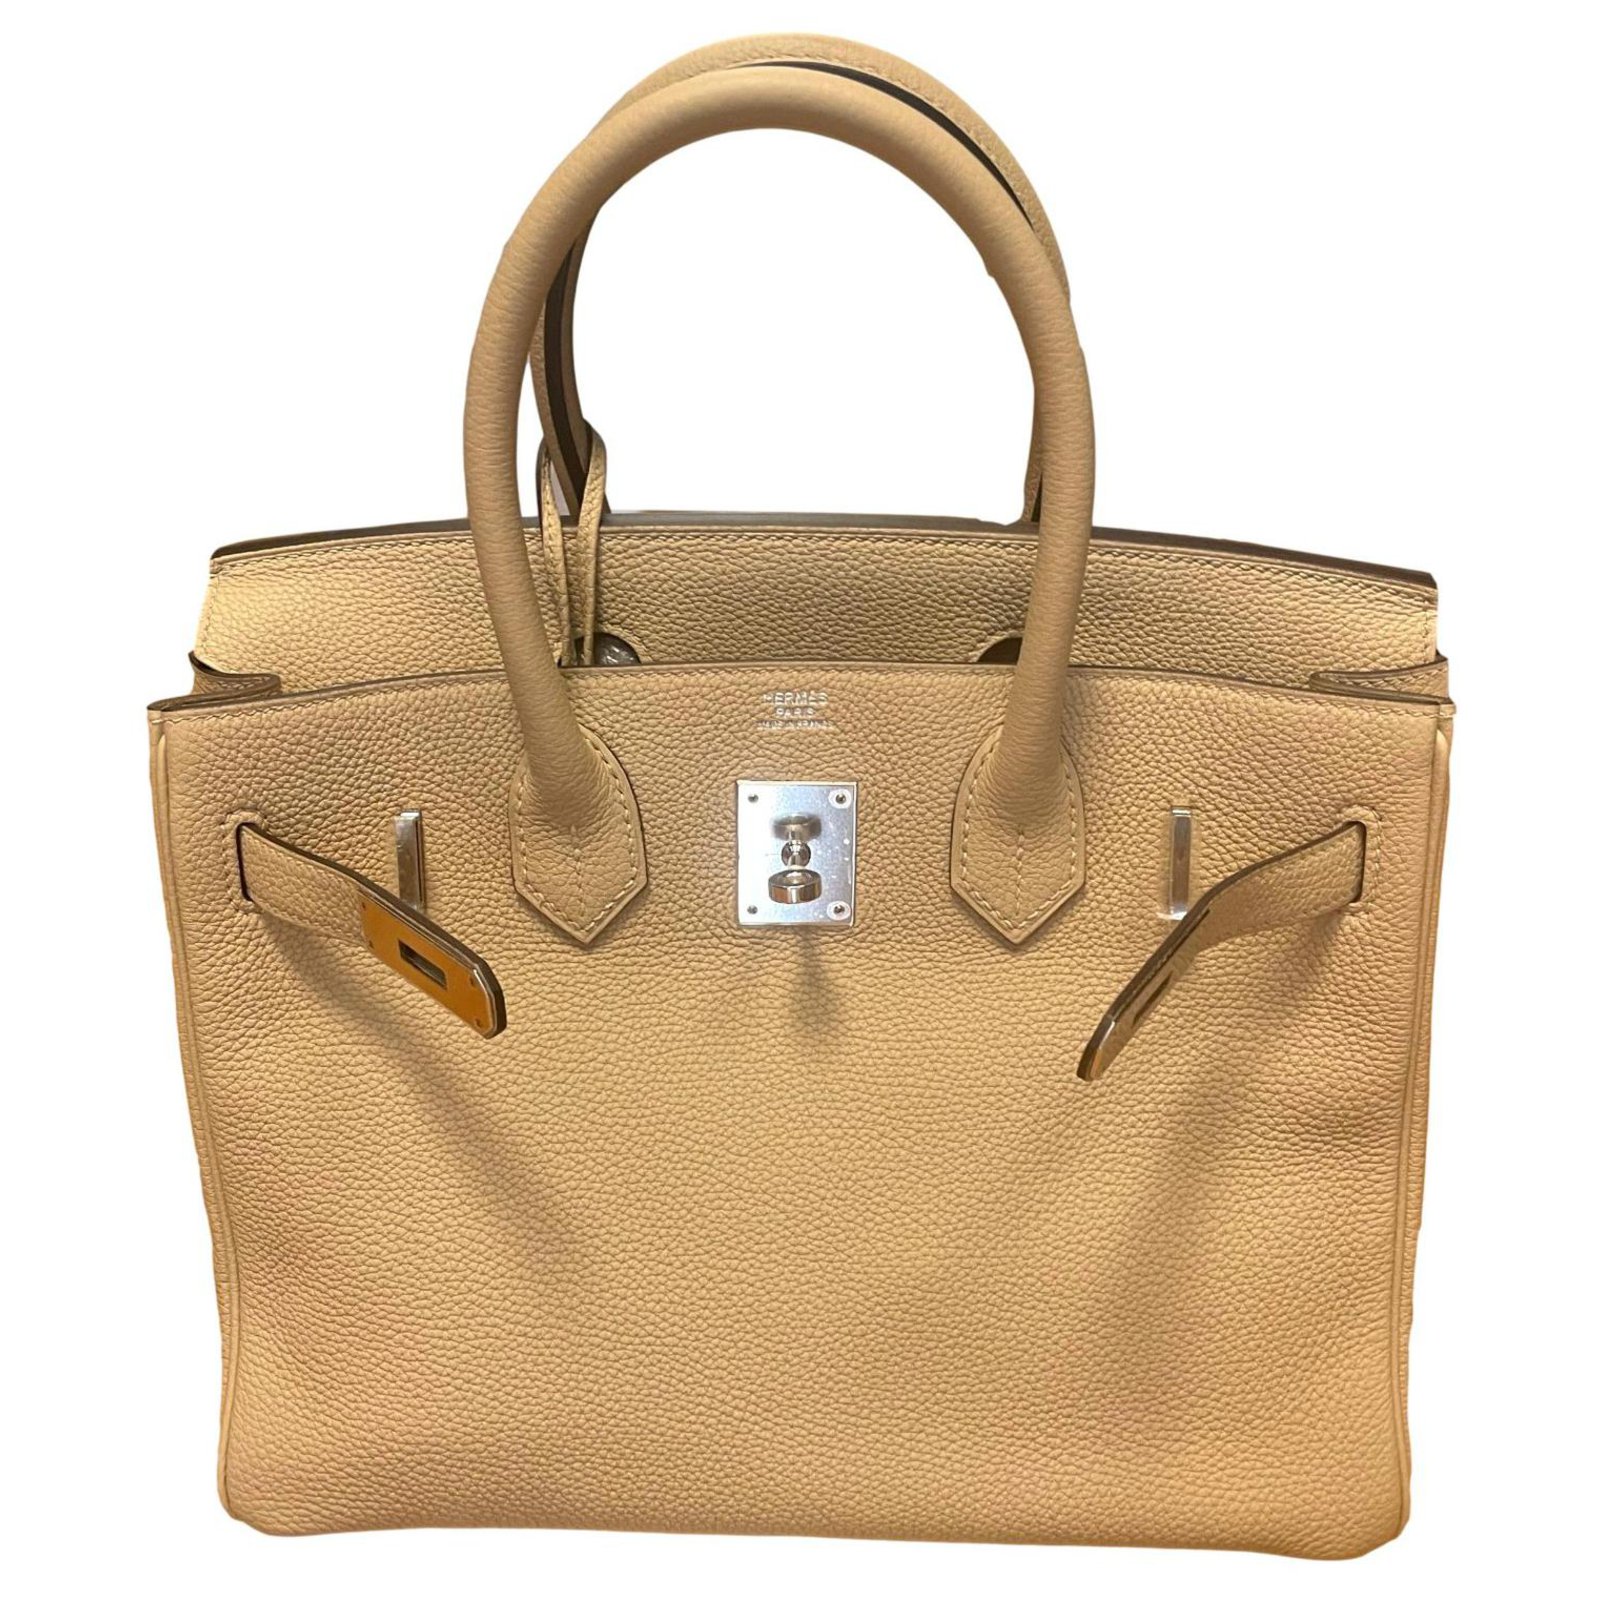 hermes togo leather colors